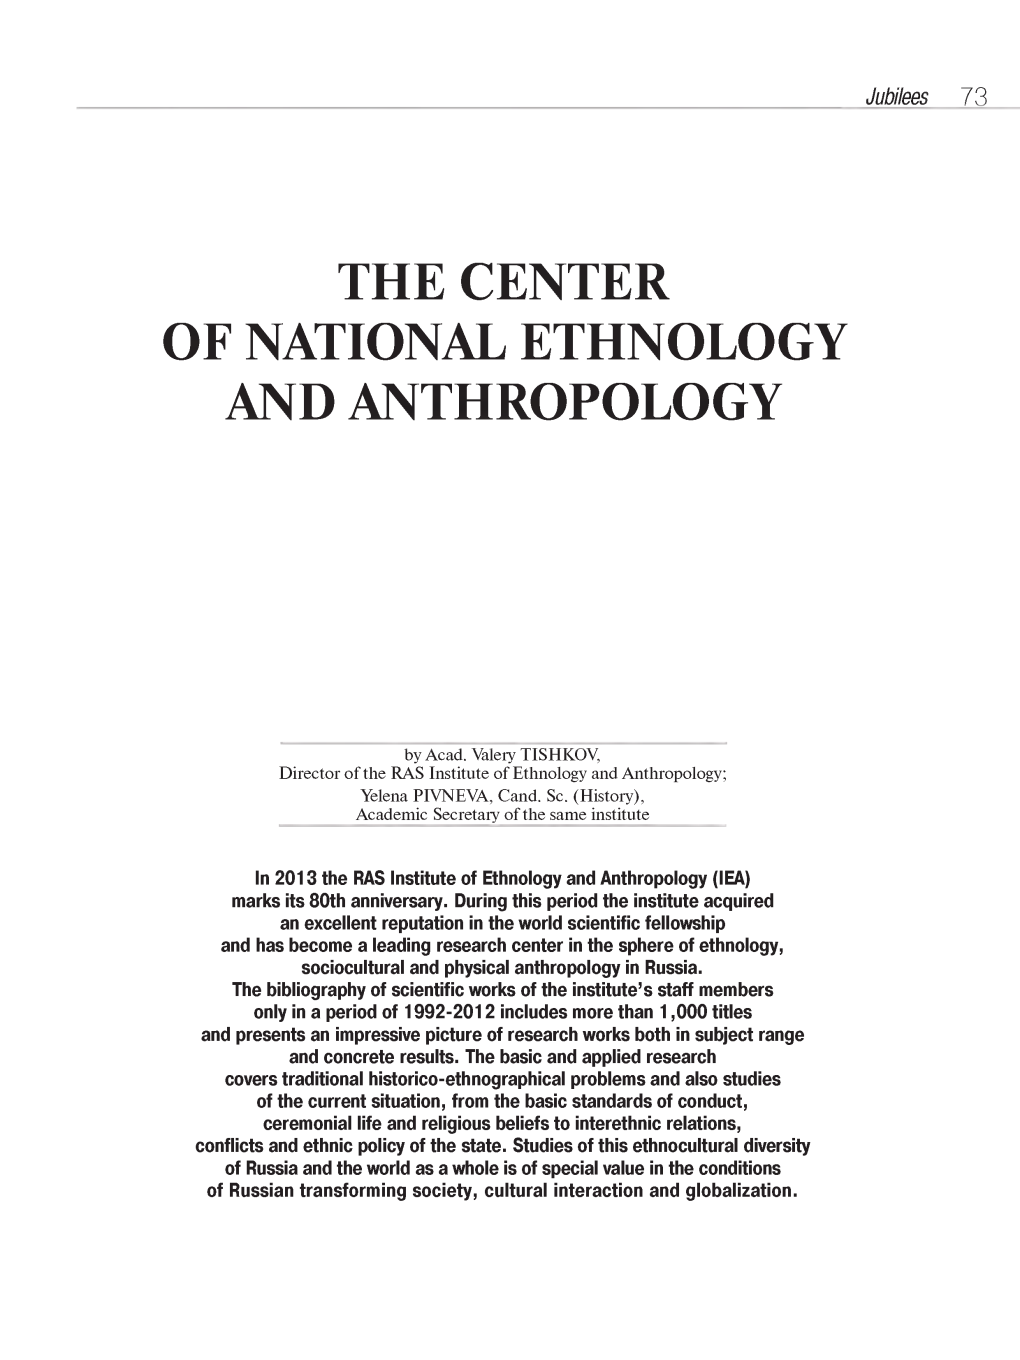 The Center of National Ethnology and Anthropology